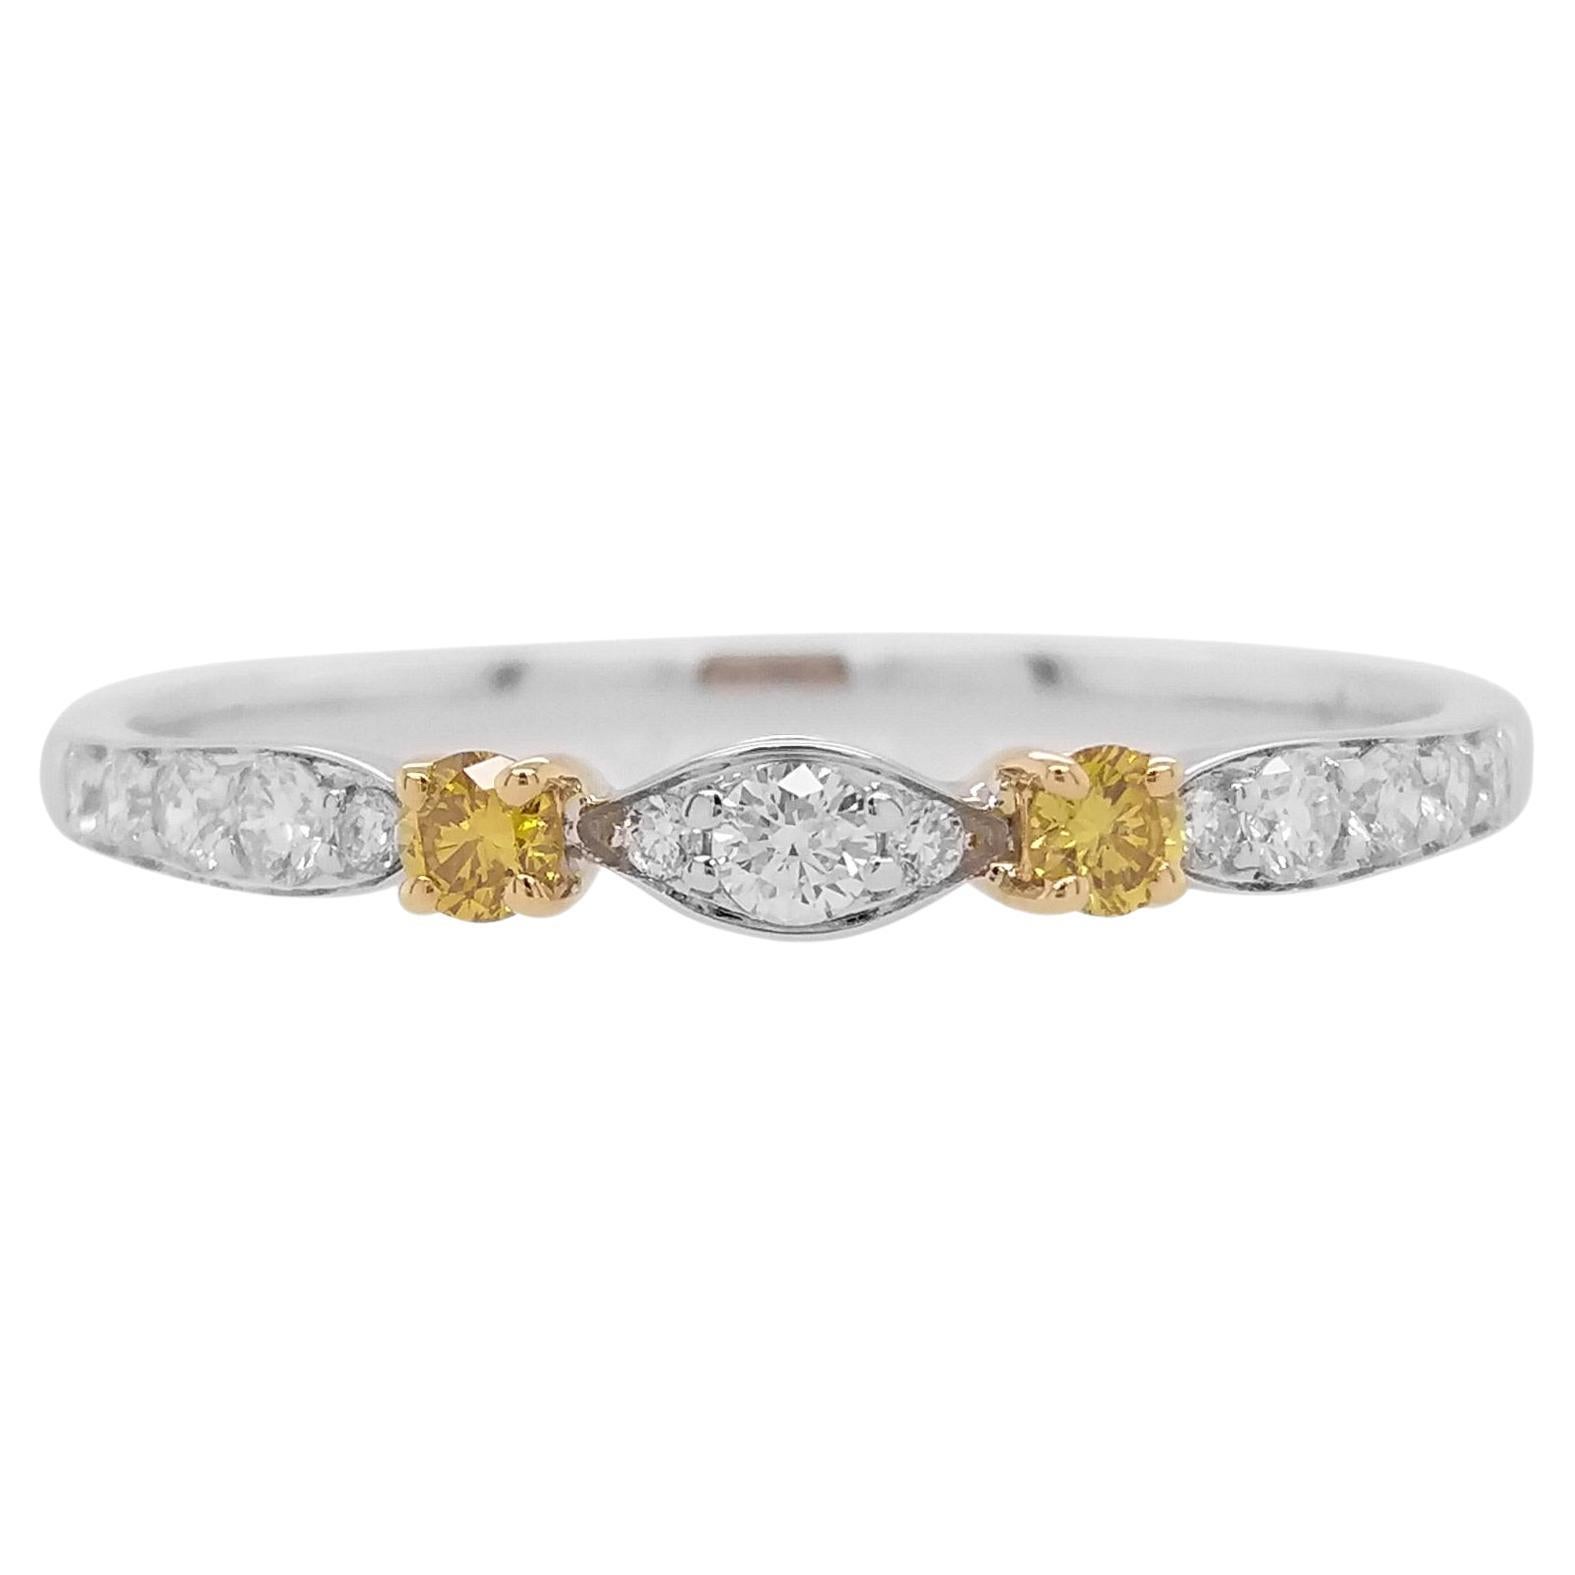 Round Yellow Diamond and White Diamond Band Ring made in 18K Gold For Sale